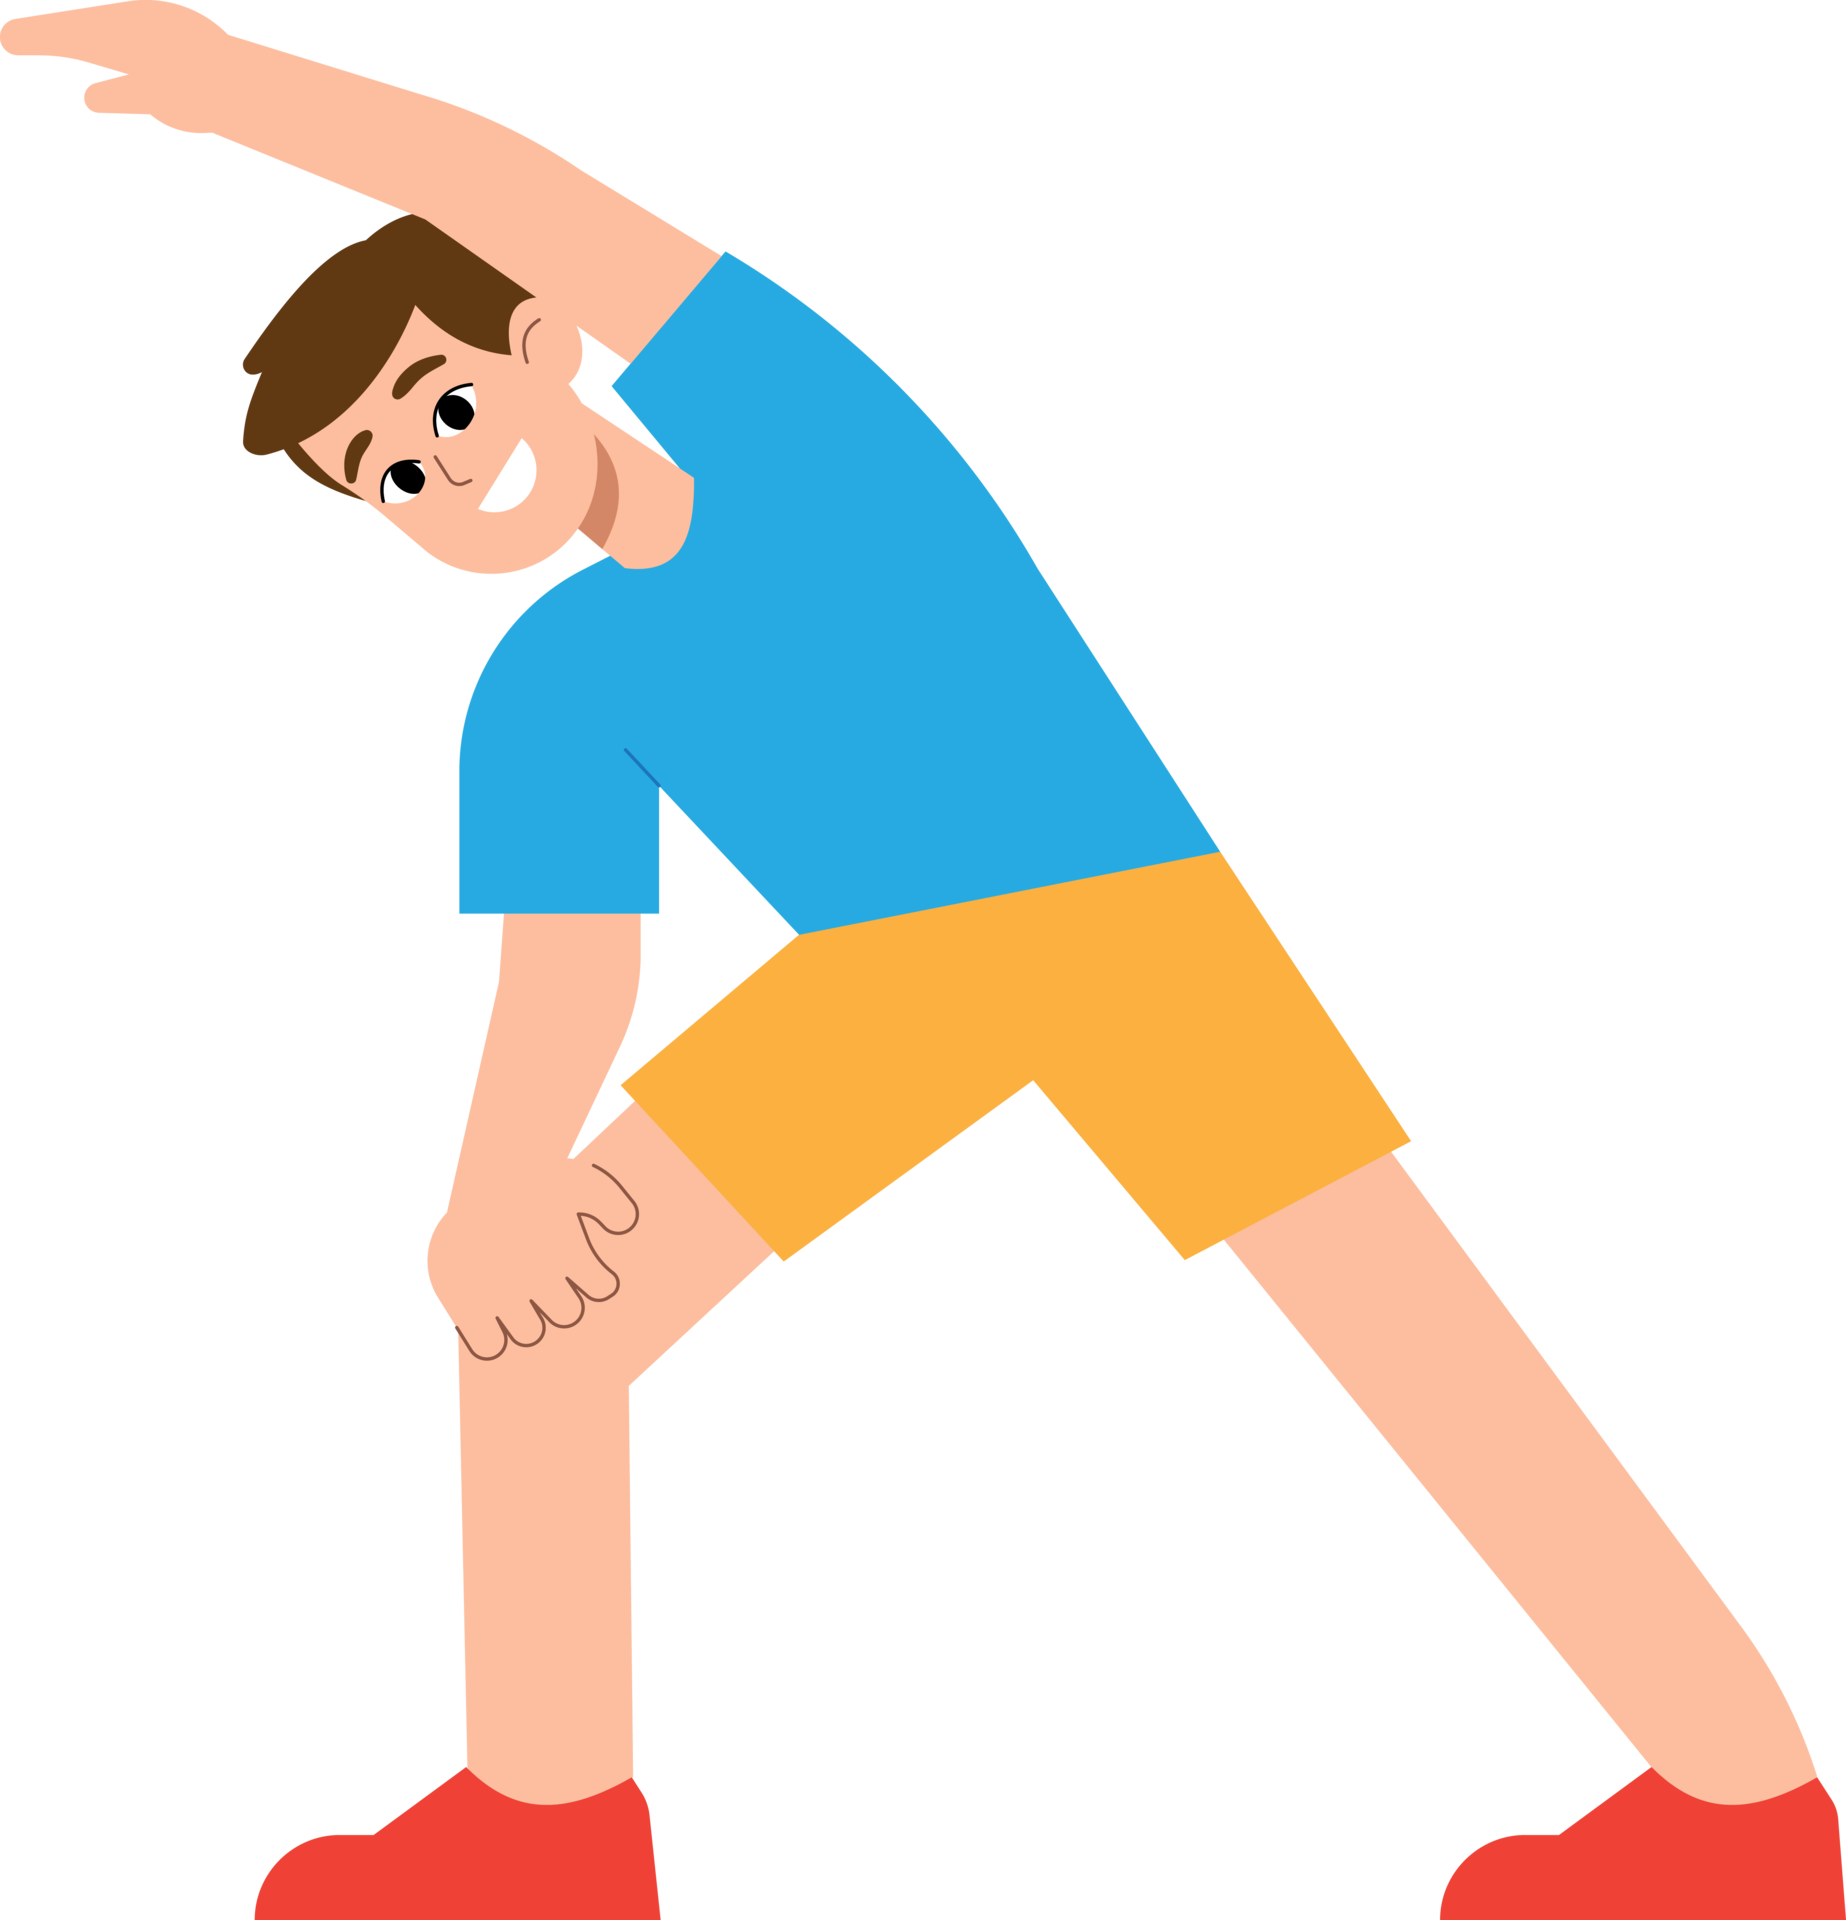 Man Stretching Exercise Cartoon Style illustration. 23986426 PNG